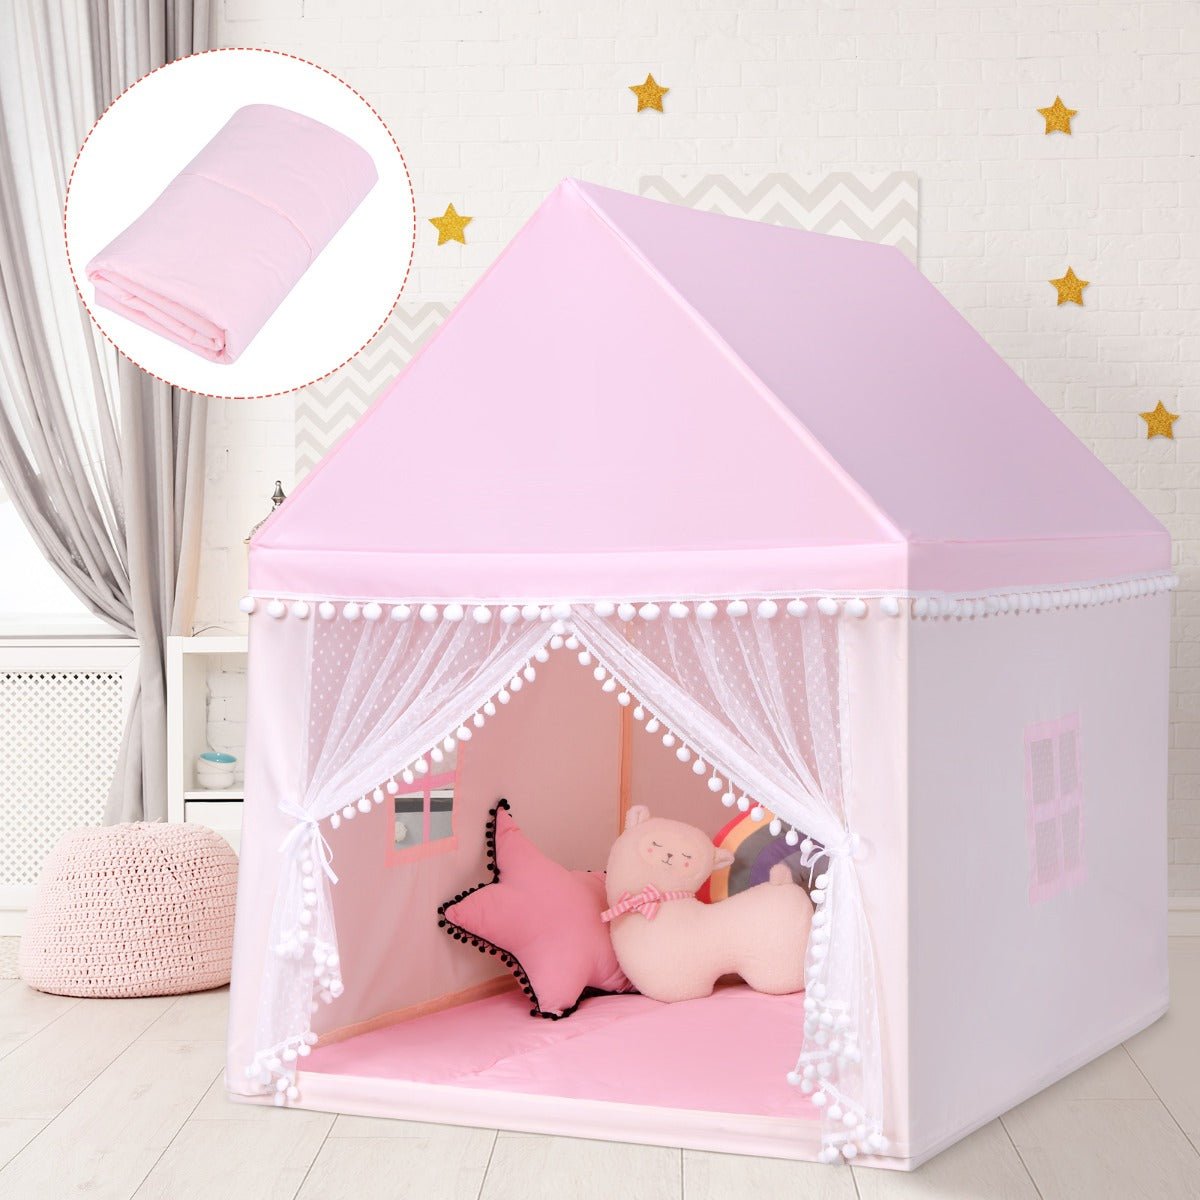 Cozy Pink Castle Playhouse for Kids with Solid Wood Frame & Cotton Mat